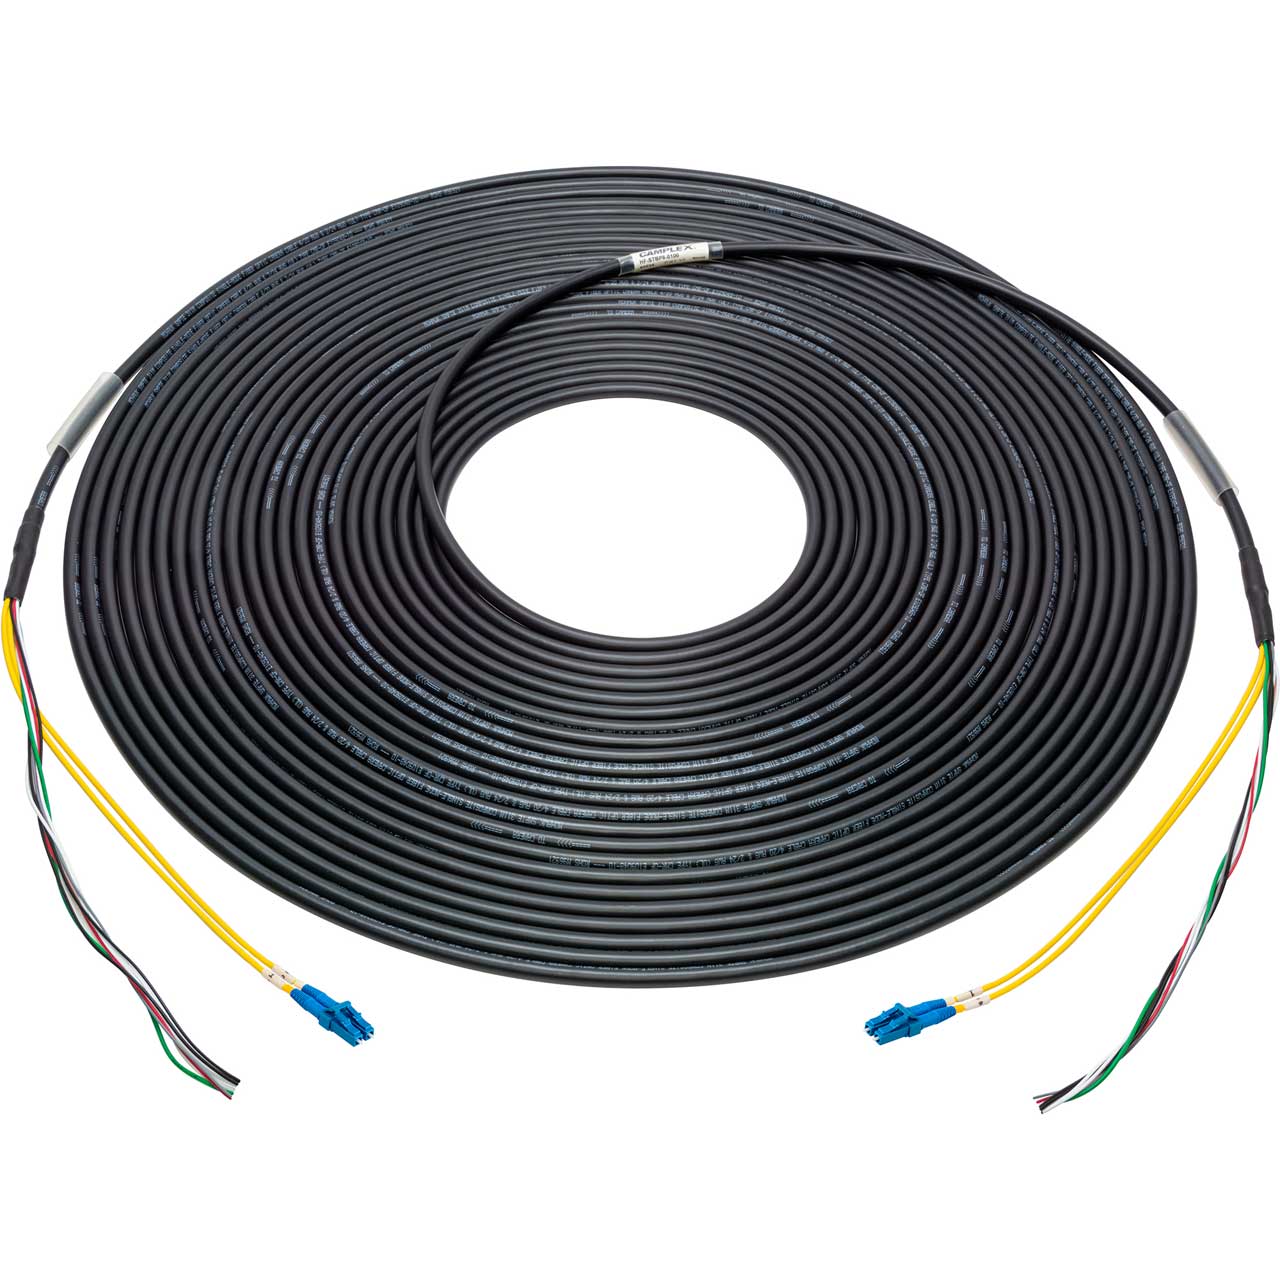 Camplex HF-LCBP4-1000 SMPTE Cable with Duplex LC Fiber and